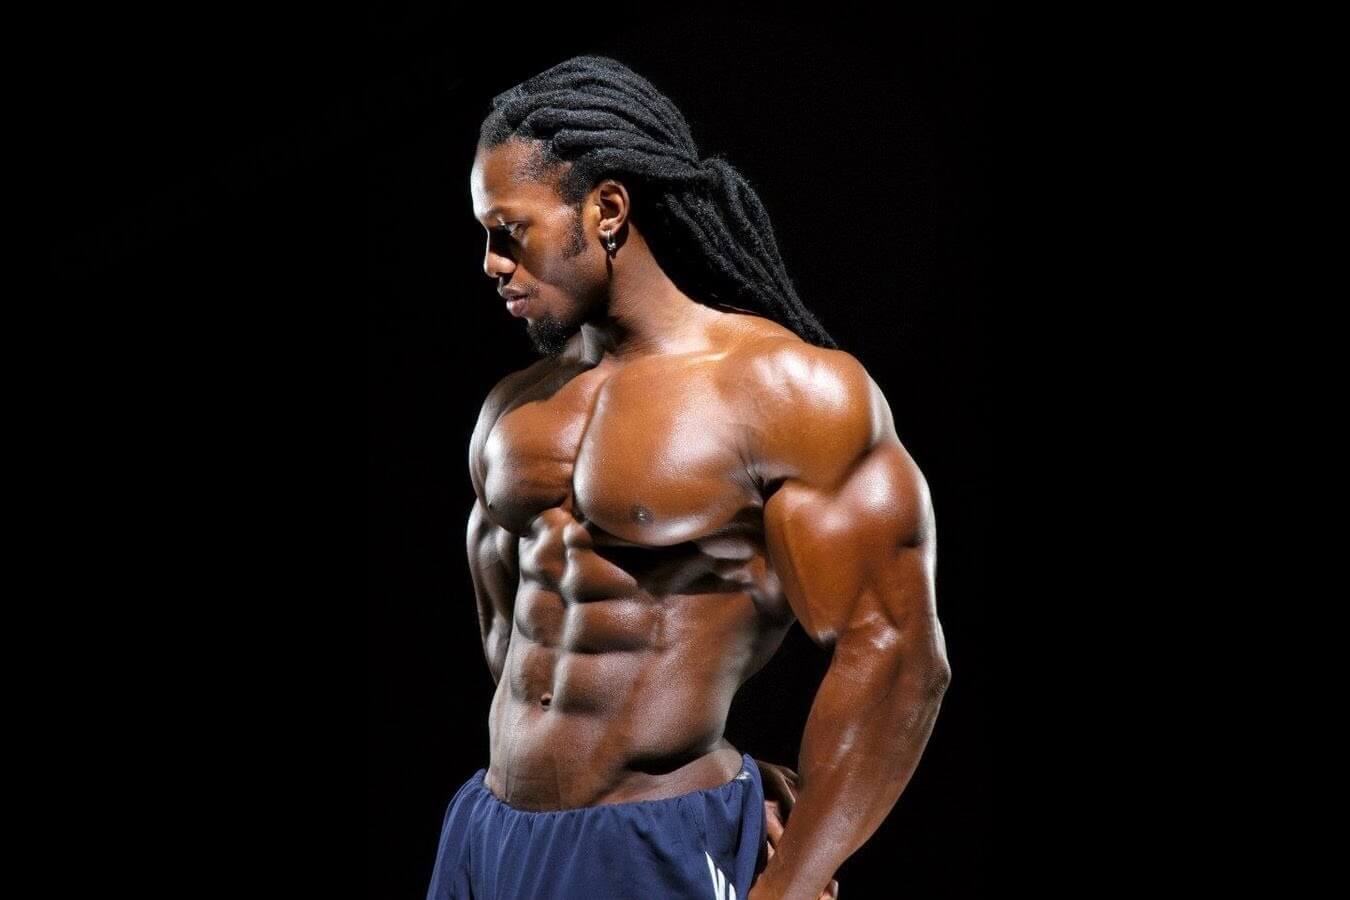 Ulisses Jr workout plan and training tips.